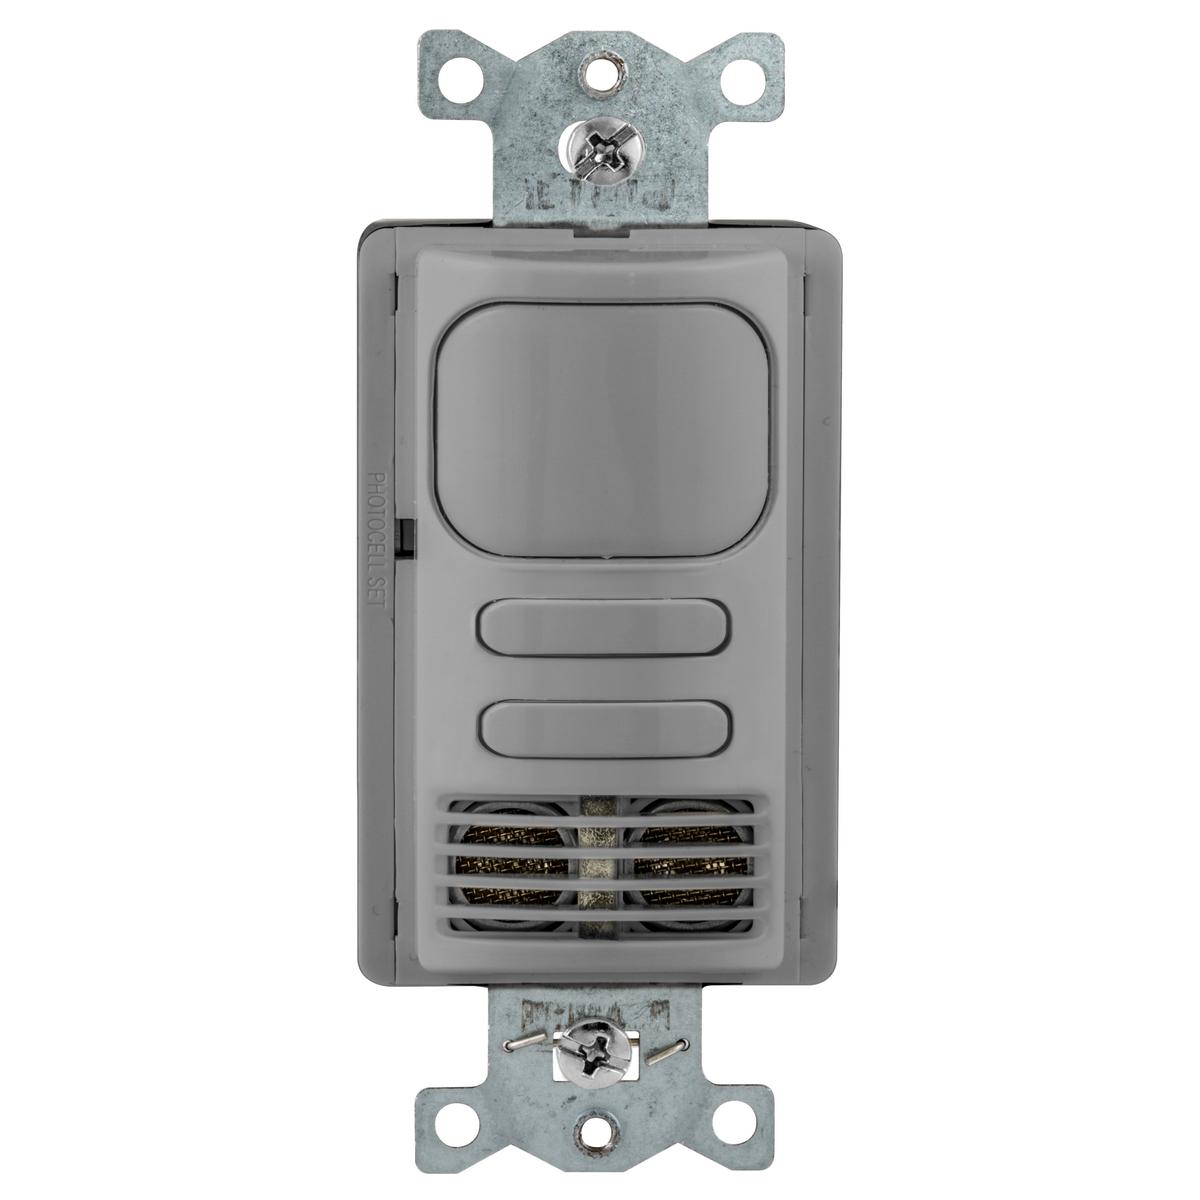 Hubbell AD2000GY22 Occupancy/Vacancy Sensors, Wall Switch,Adaptive Dual Technology, 2 Circuit, 120/277V AC, Gray 